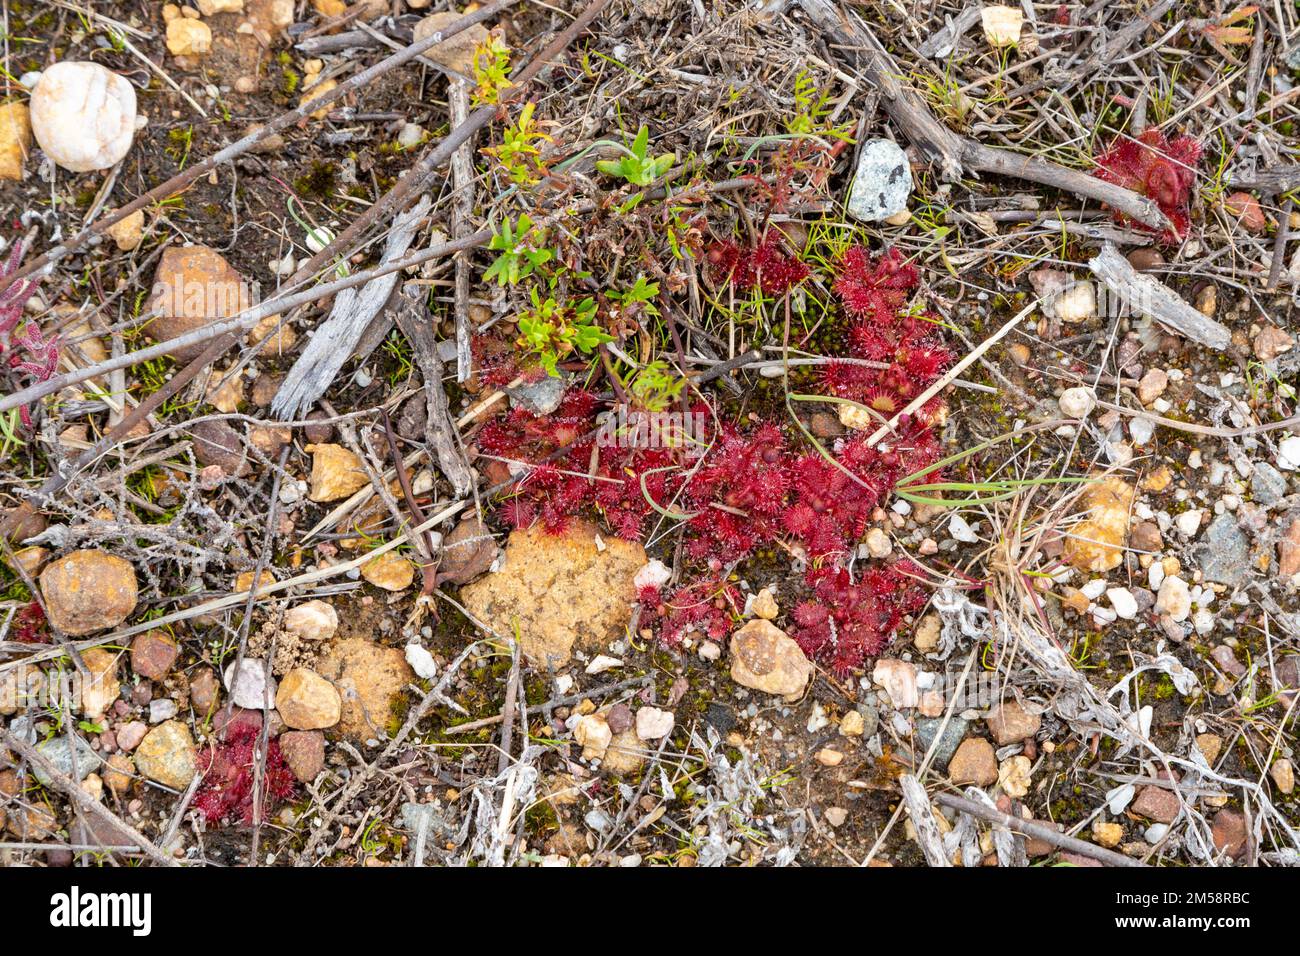 some red rosettes of the Sundew Drosera trinervia in natural habitat Stock Photo